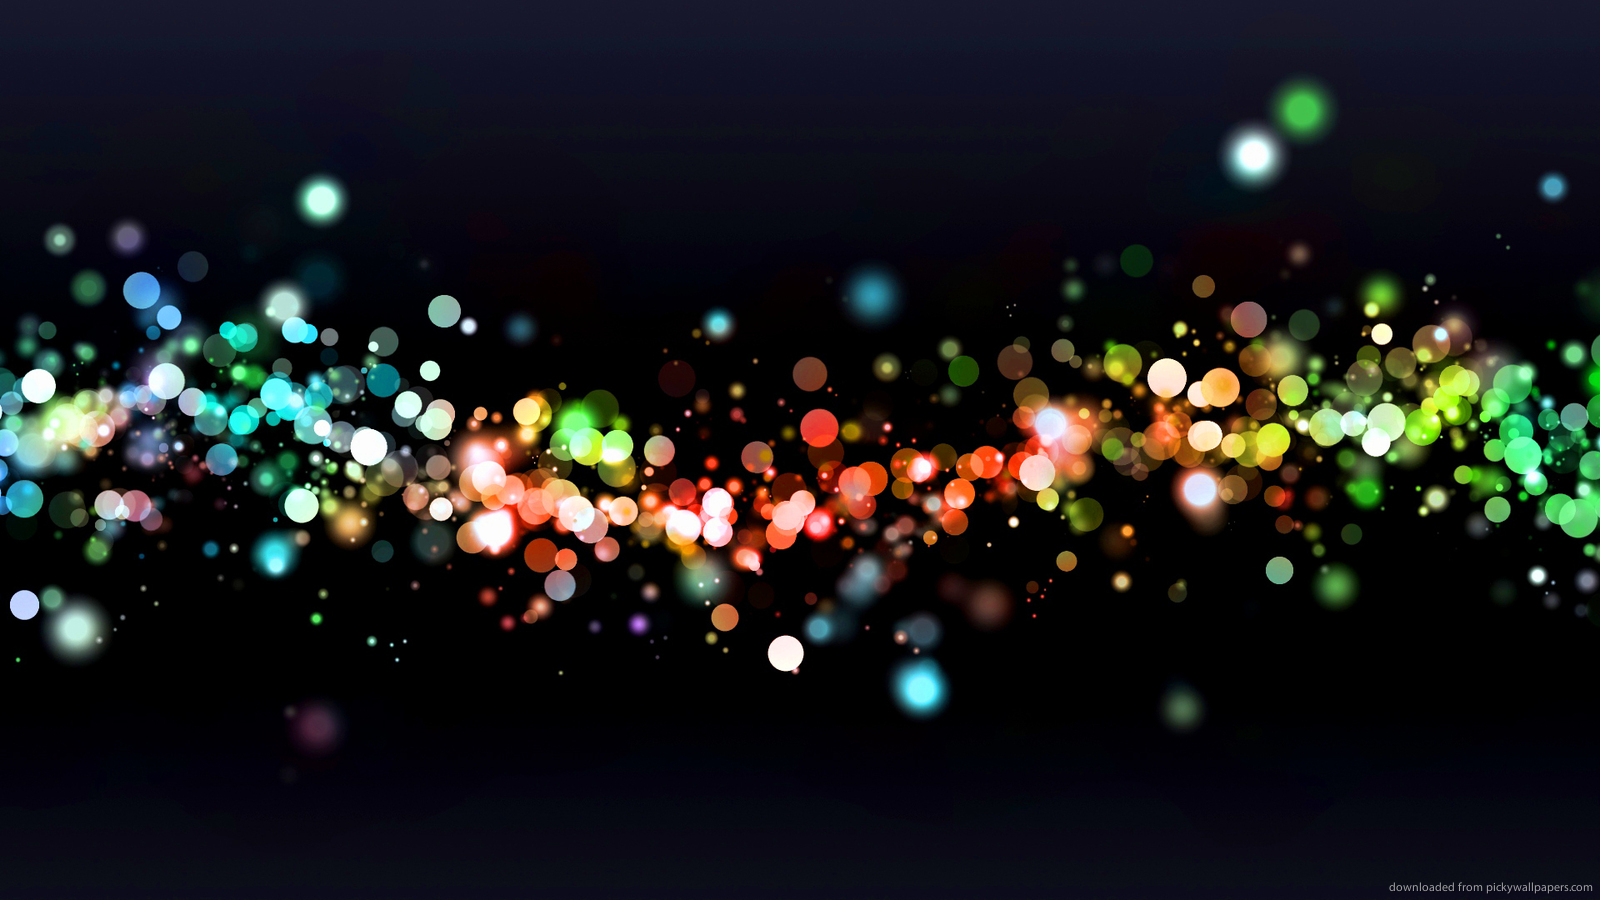 Download 1600x900 Cool Sparkly Rounds Wallpaper